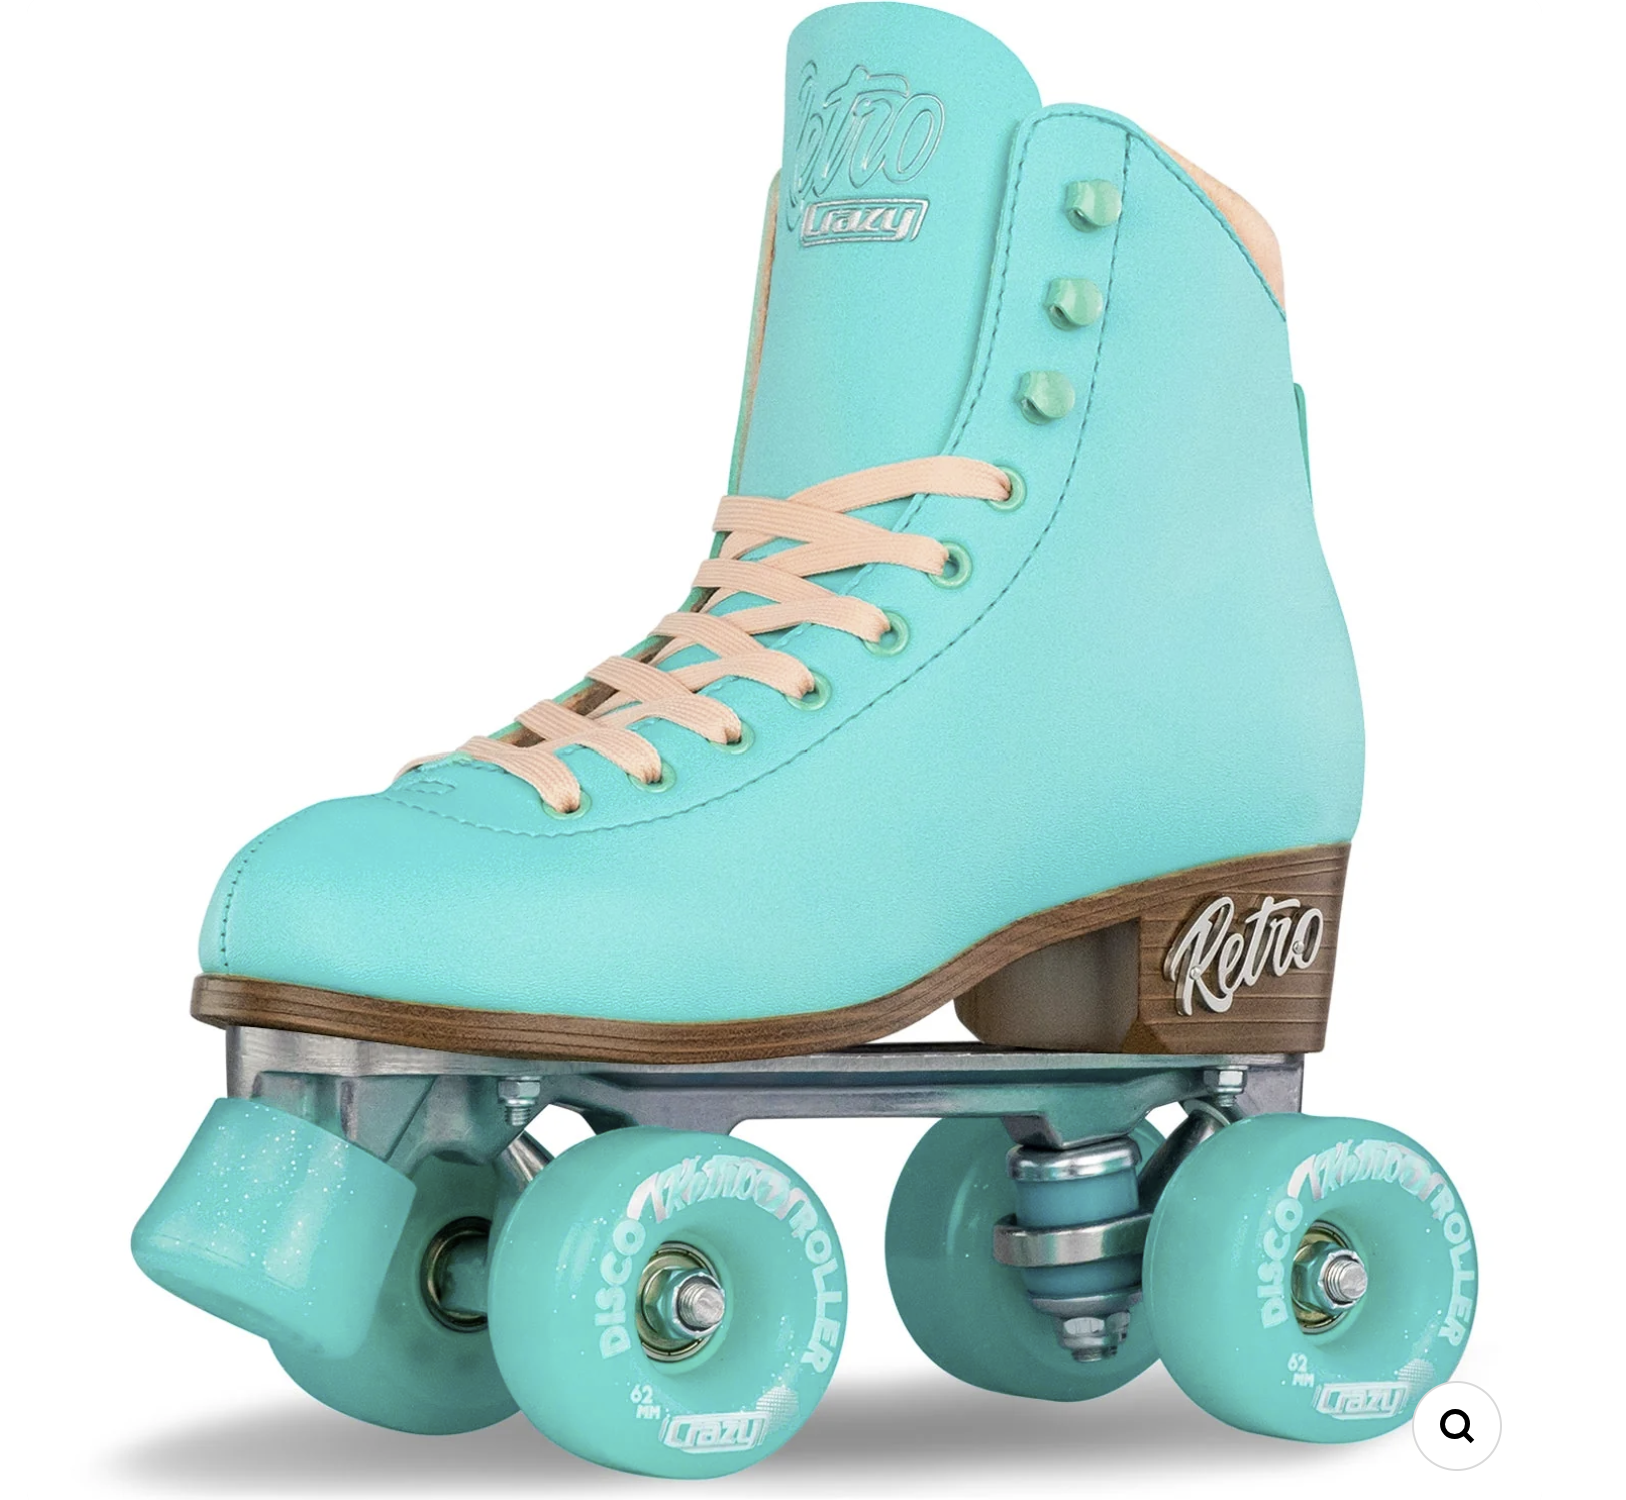 A single roller-skate. Boot is shiny teal vinyl with peach laces. Wheels and toe stop are matching teal. 